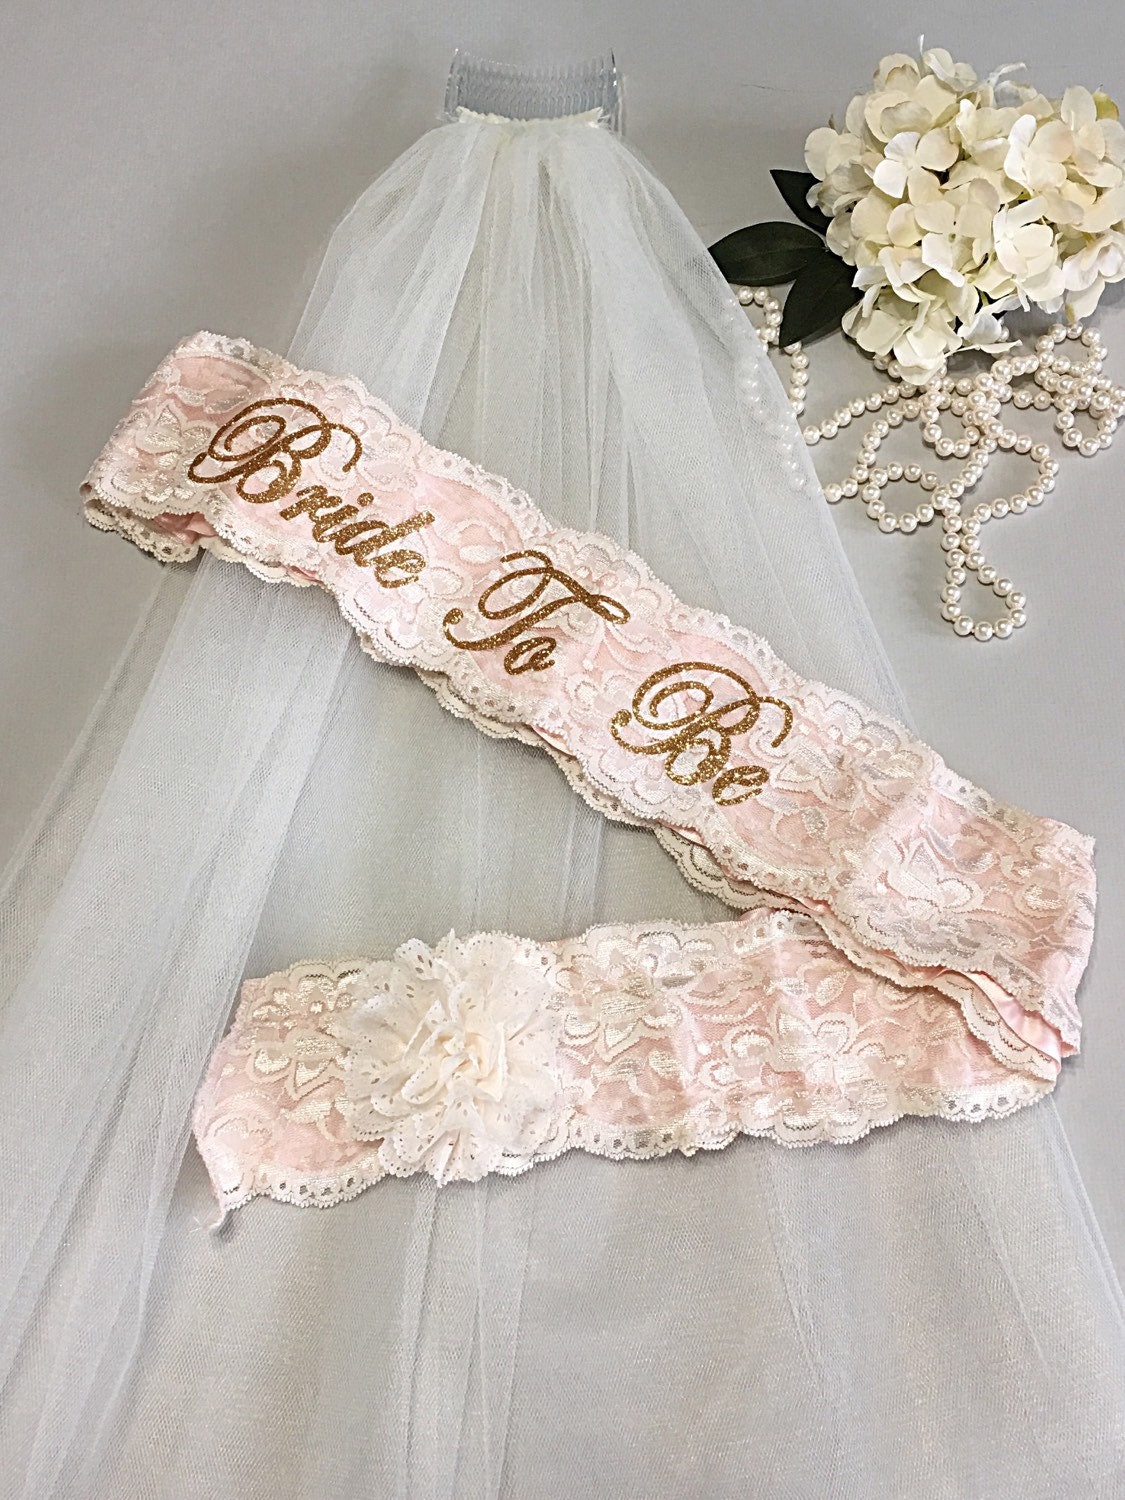 featured-etsy-products-bridal-shower-ideas-themes